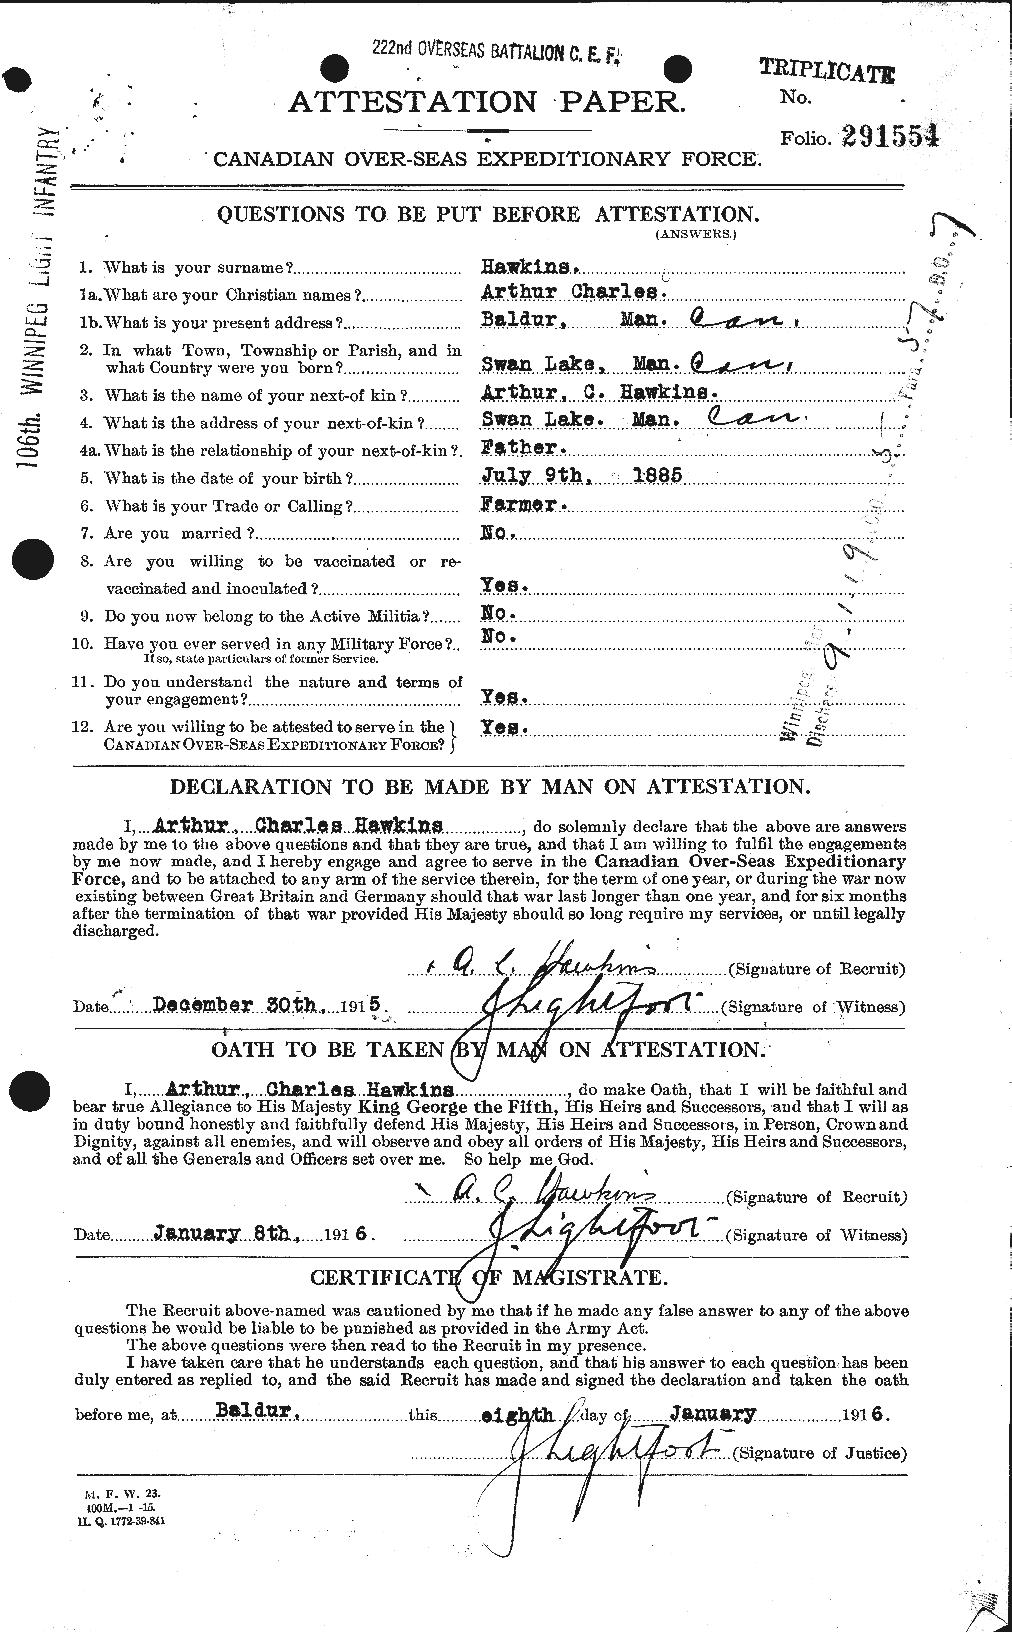 Personnel Records of the First World War - CEF 384625a